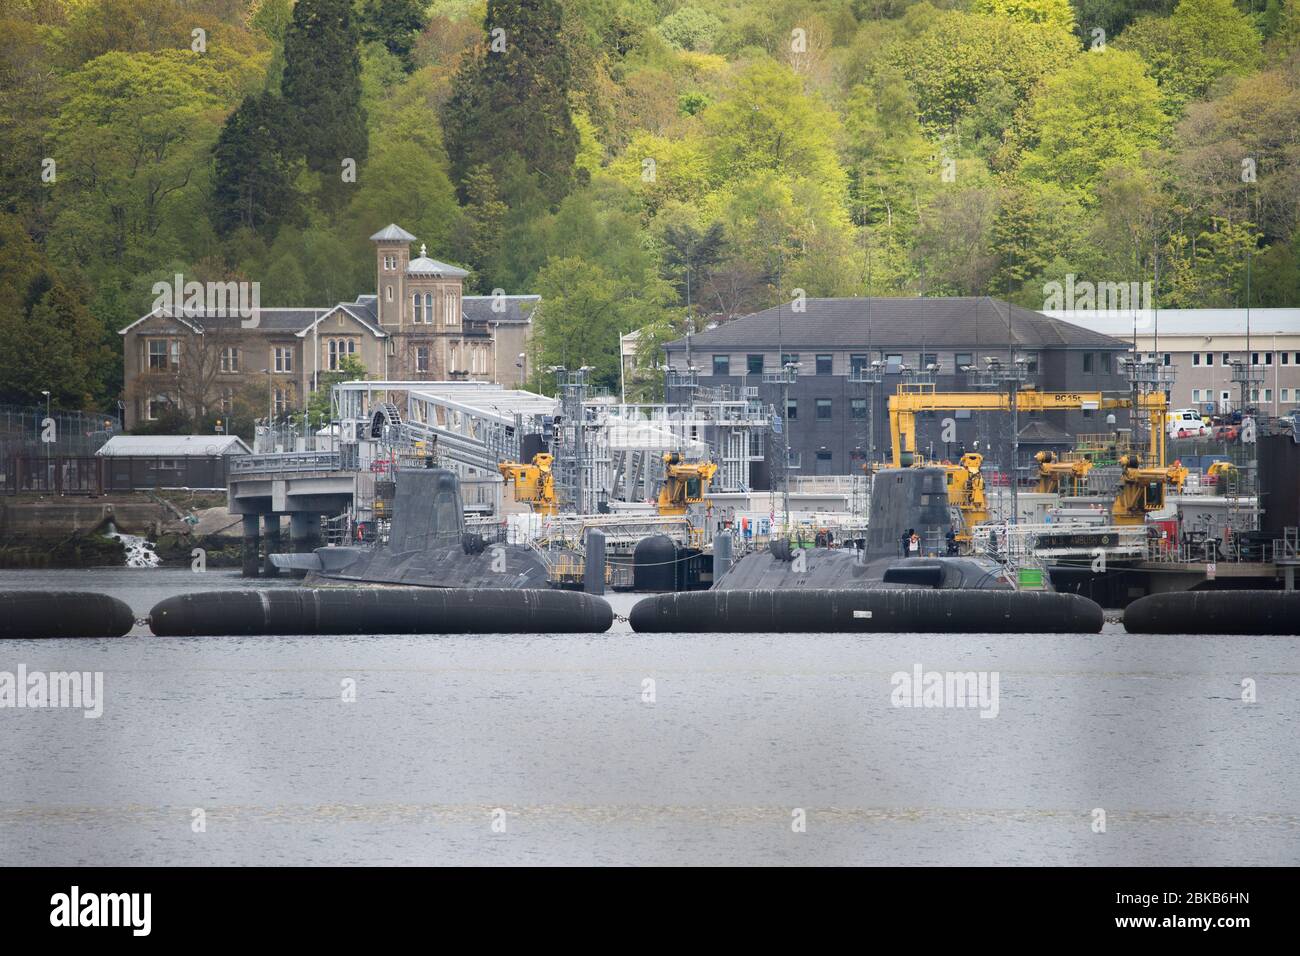 Faslane, Scotland, UK. 3 May 2020. Pictured: The Ministry of Defence (MoD) has banned its military and civilian staff from speaking publicly about Trident nuclear weapons in Scotland. Armed forces and MoD civil servants have been instructed not make any public comment, or have any contact with the media, on “contentious topics” such as “Trident/Successor” and “Scotland and Defence”. The instructions have been condemned as a “gagging order worthy of a dictatorship” by campaigners.  Credit: Colin Fisher/Alamy Live News Stock Photo